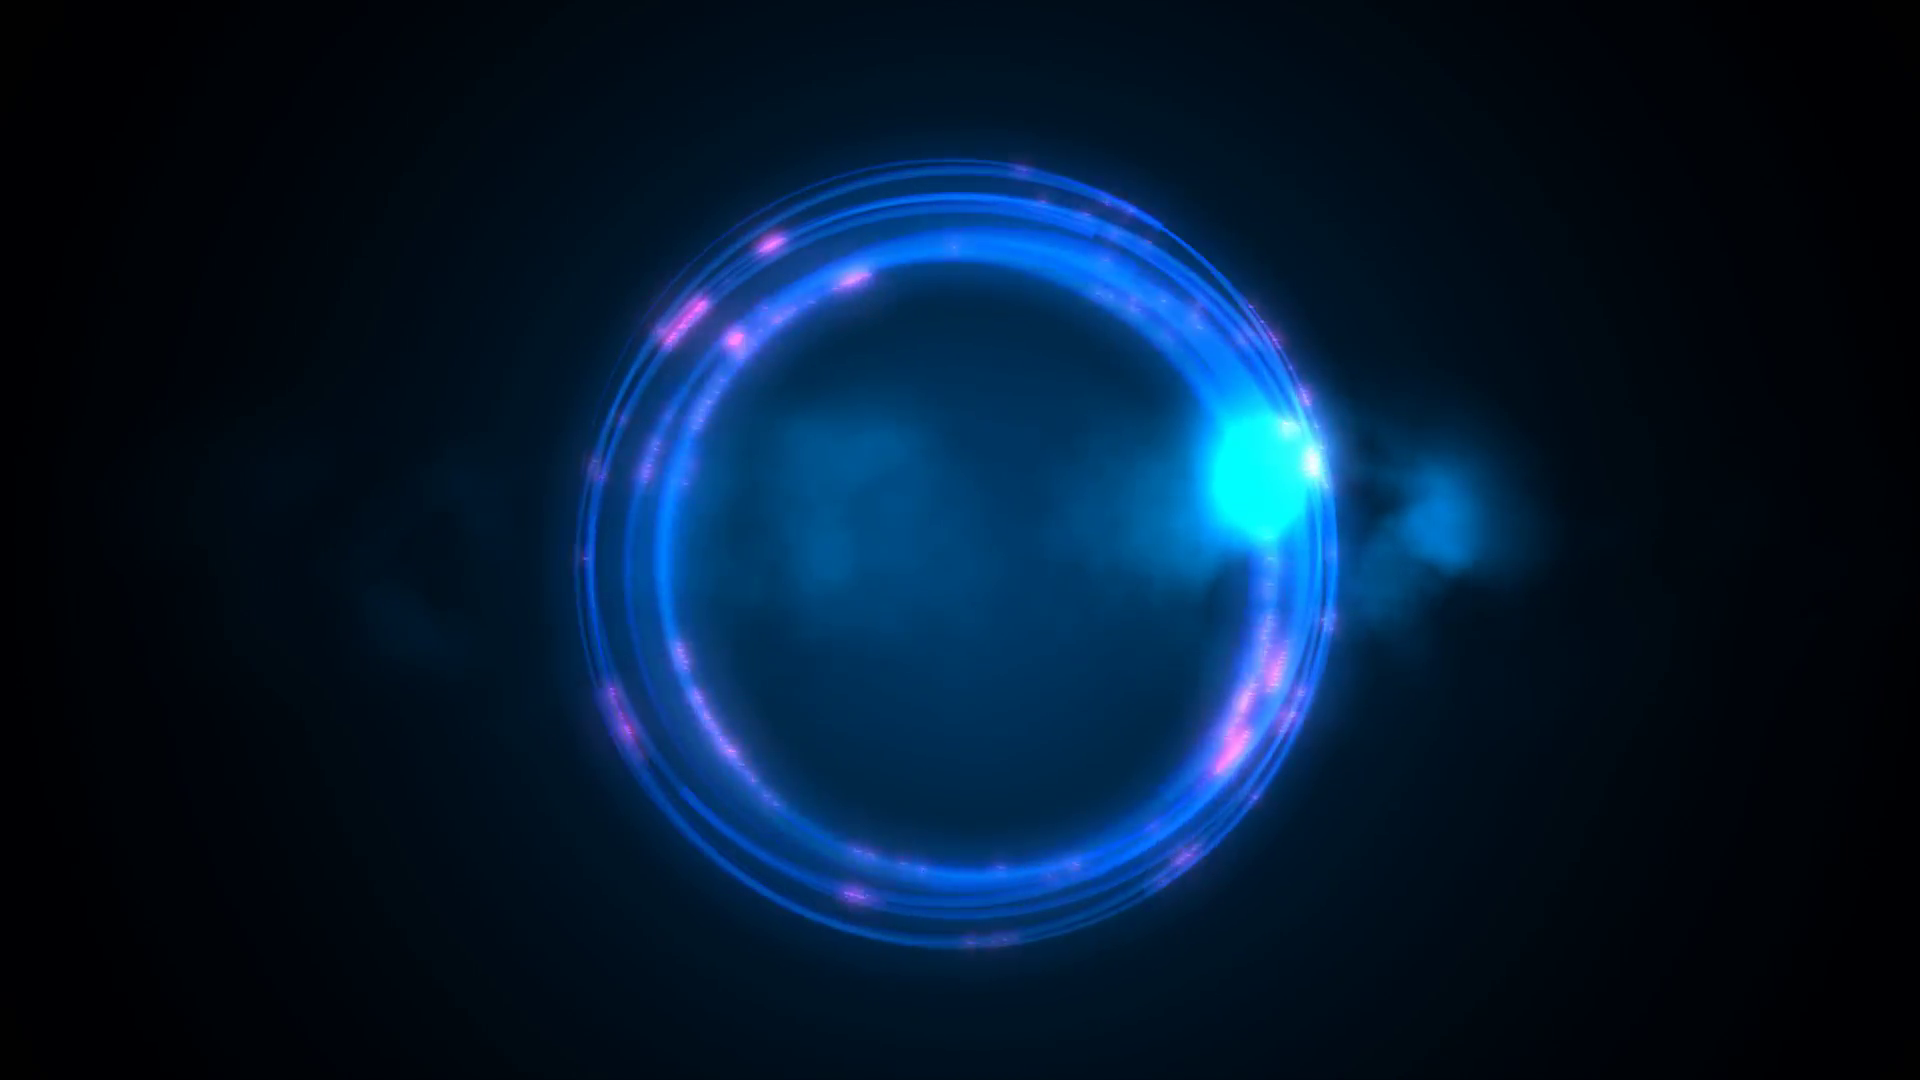 Blue light animation effect for background.Loop-able Motion ...